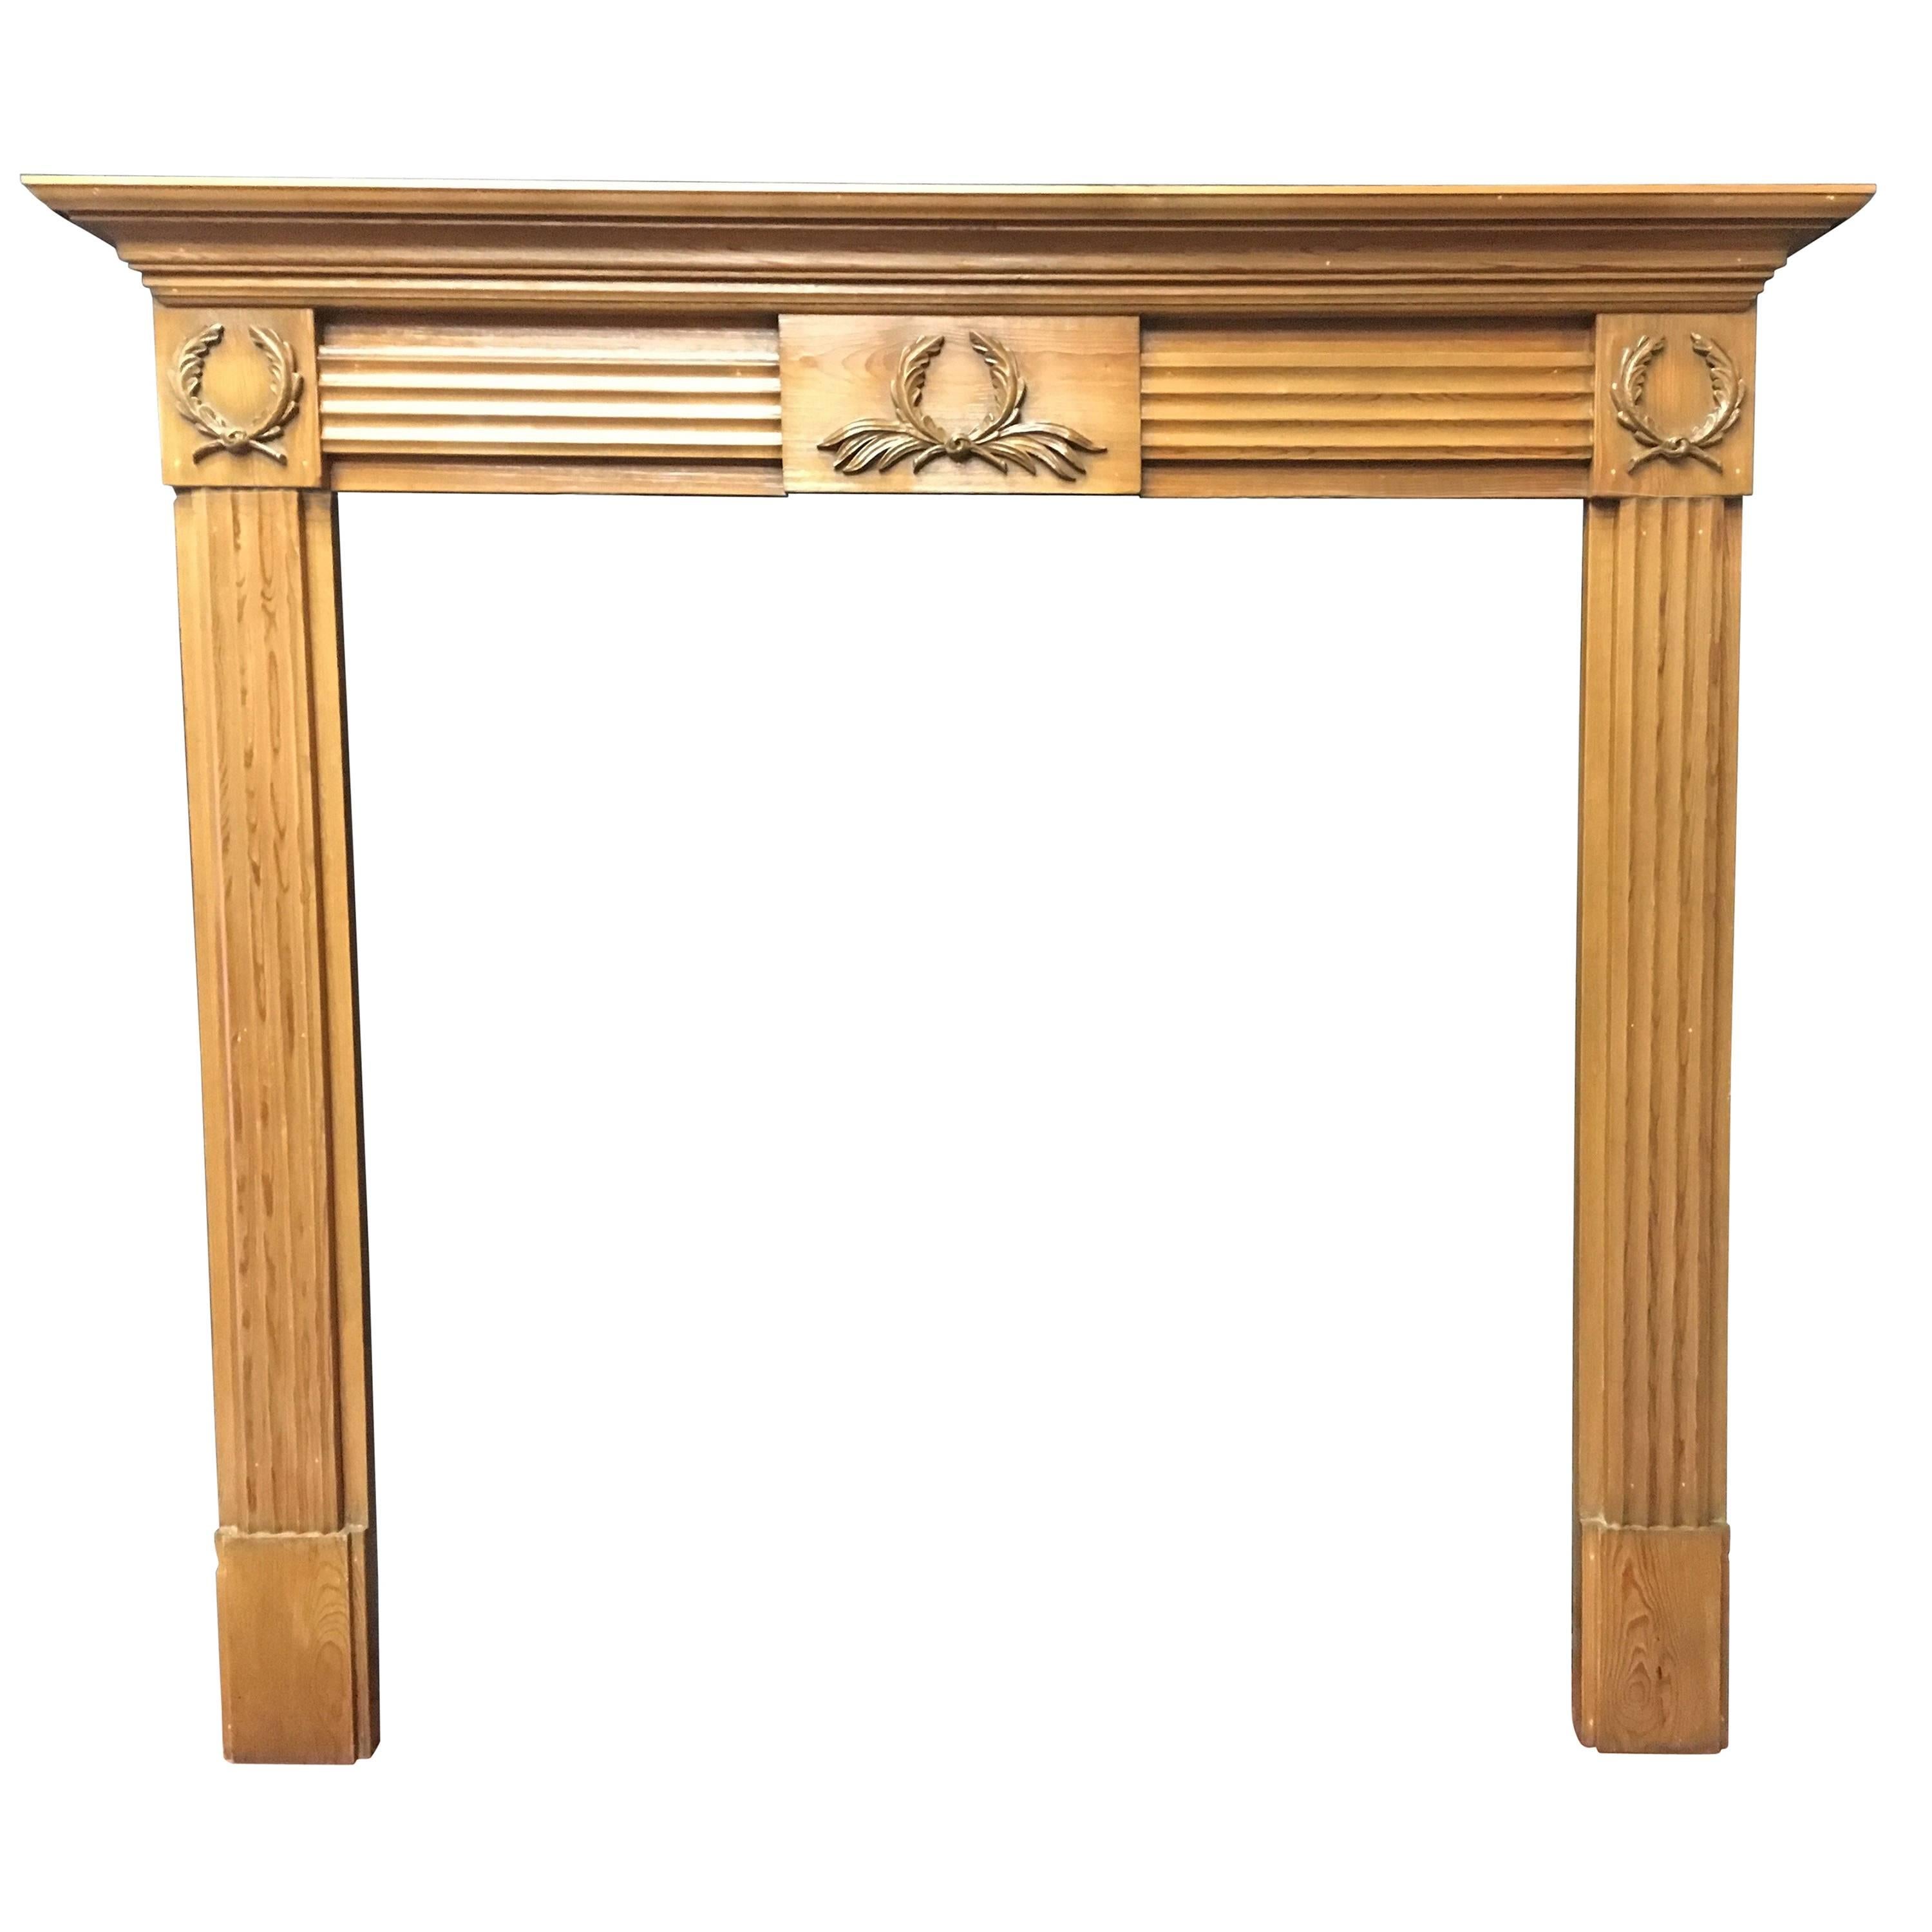 Aged Georgian Style Carved Pine Fireplace Surround.